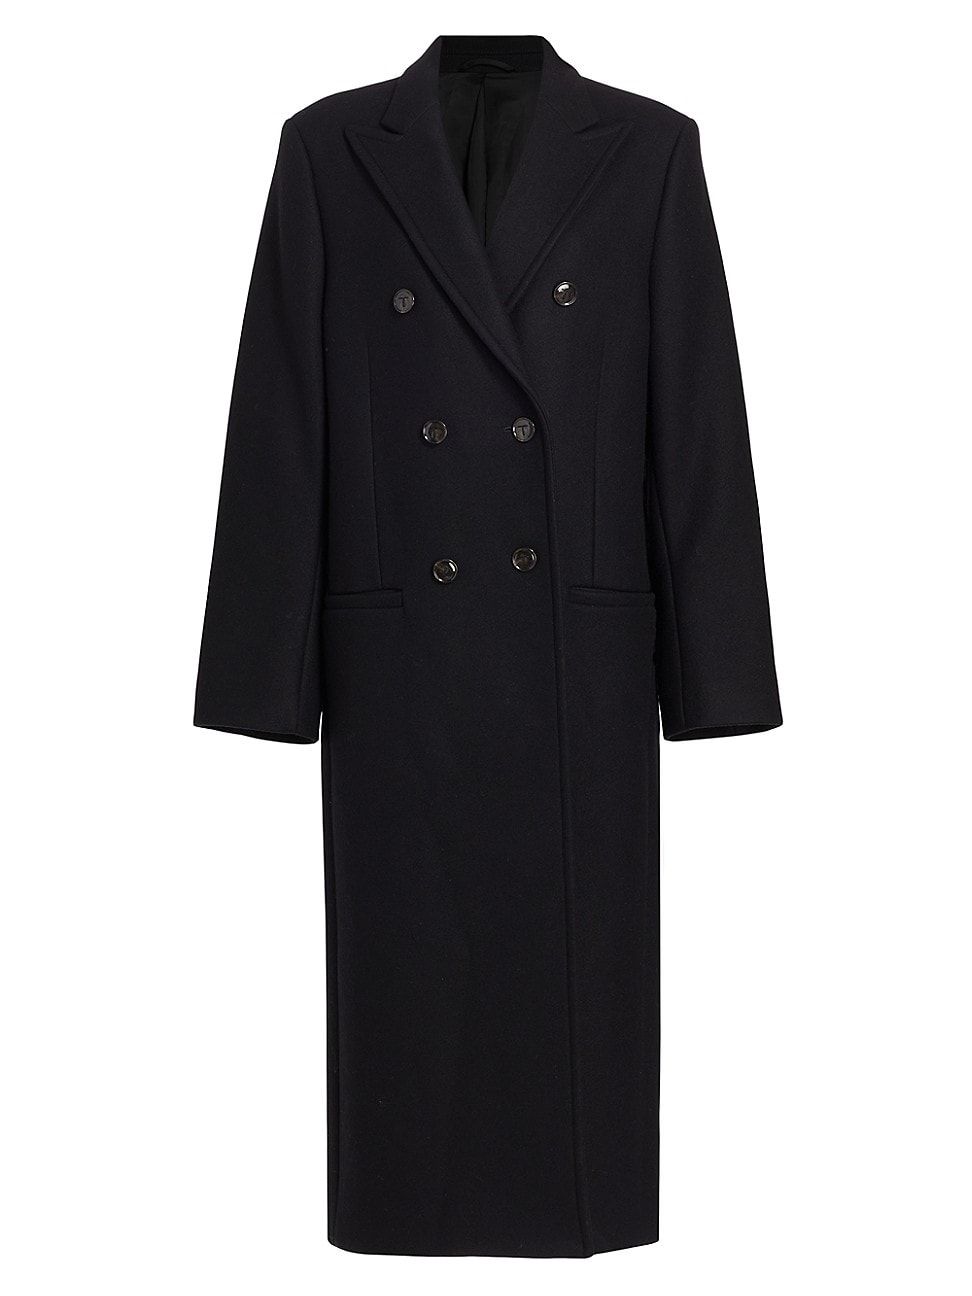 Women's Tailored Double-Breasted Wool Coat - Black - Size 8 | Saks Fifth Avenue